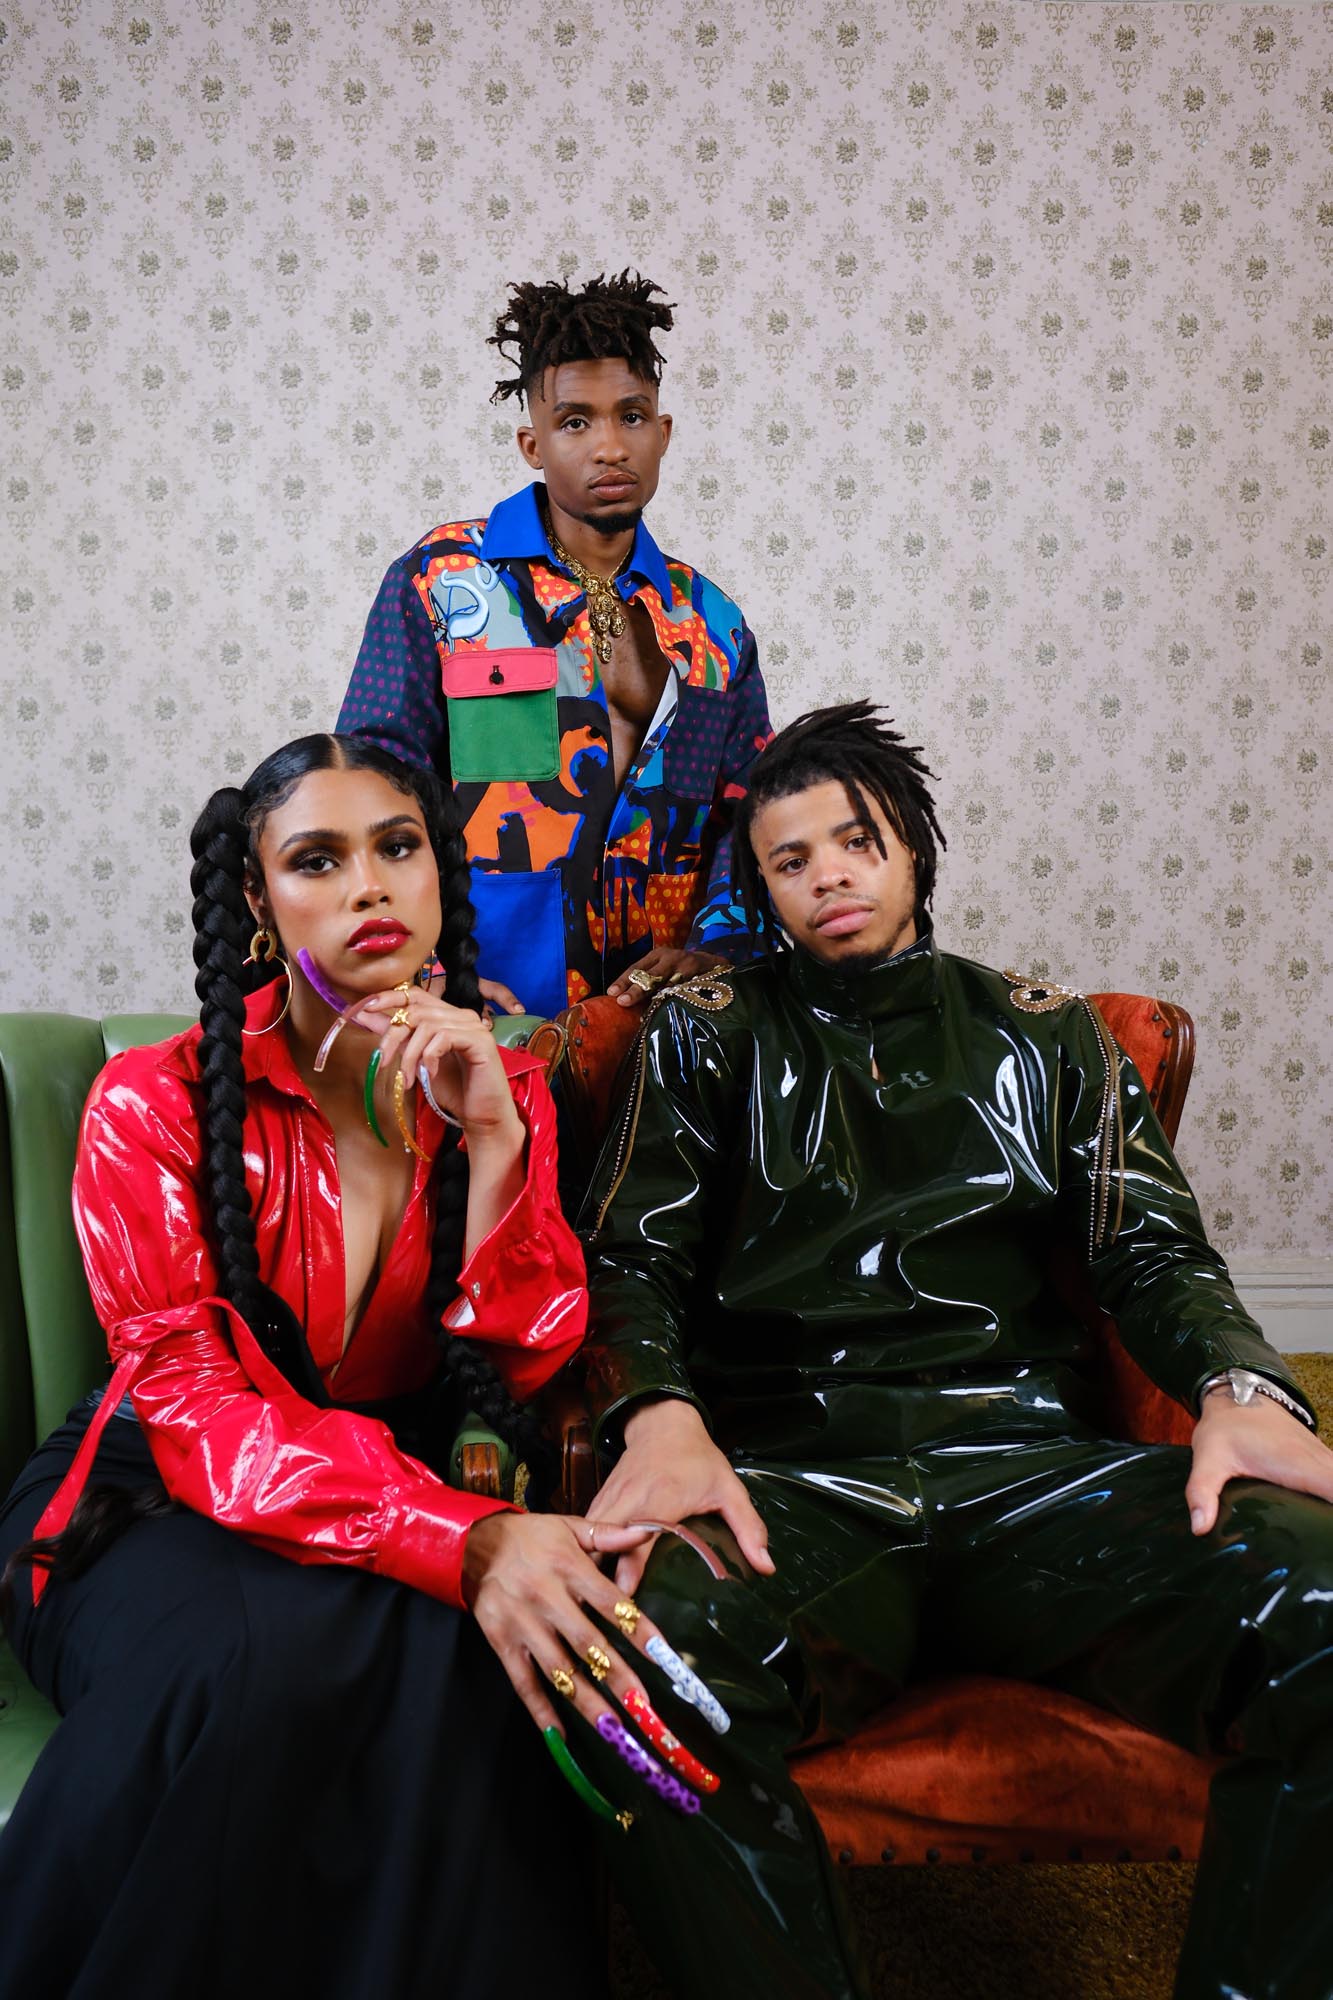 Three young African Americans pose in luxurious high fashion, framed against a drab wallpaper background